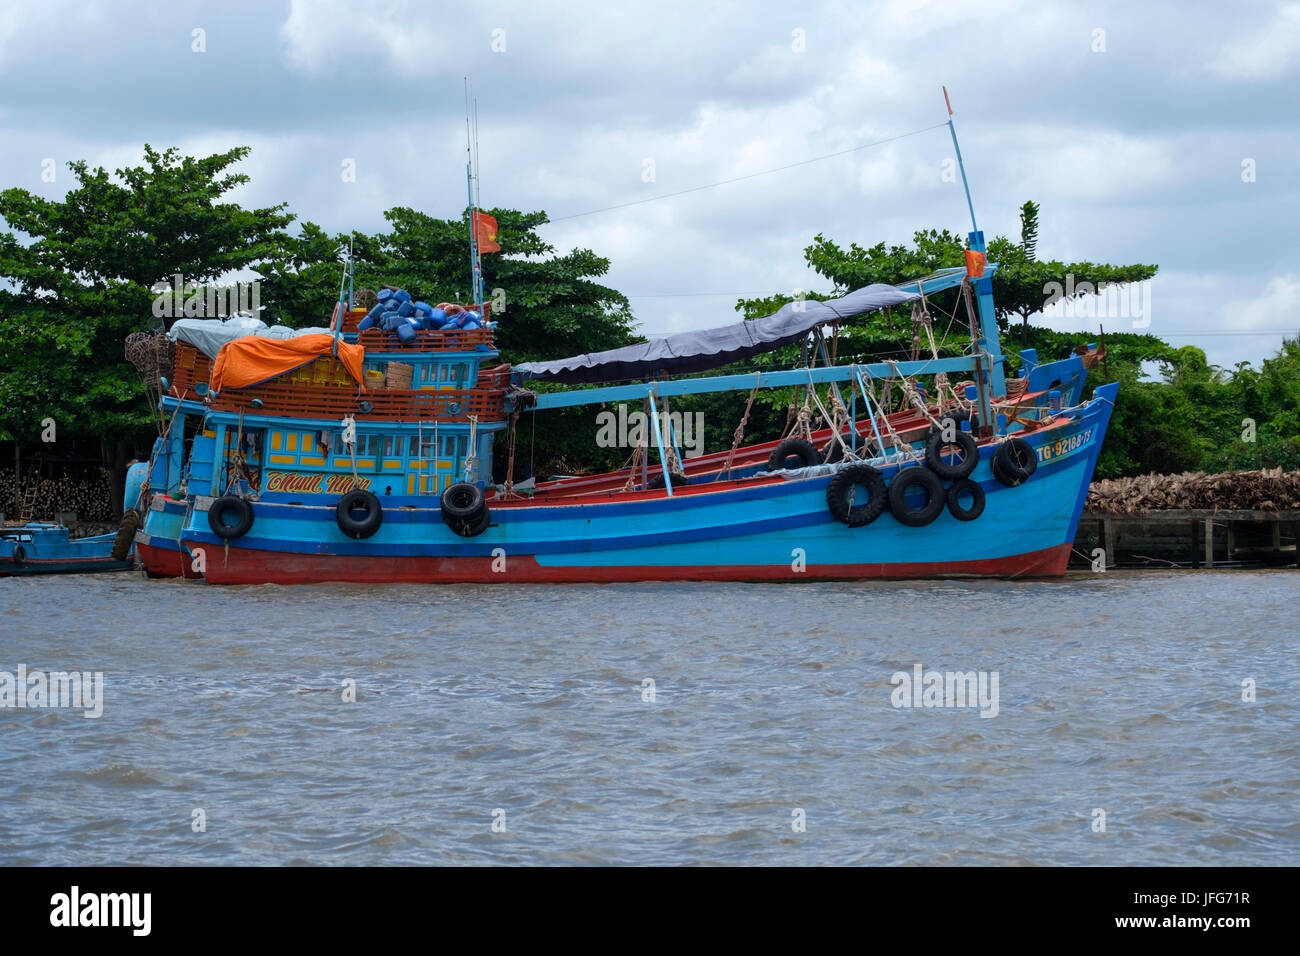 Colorful fishing boat on the Mekong river Stock Photo